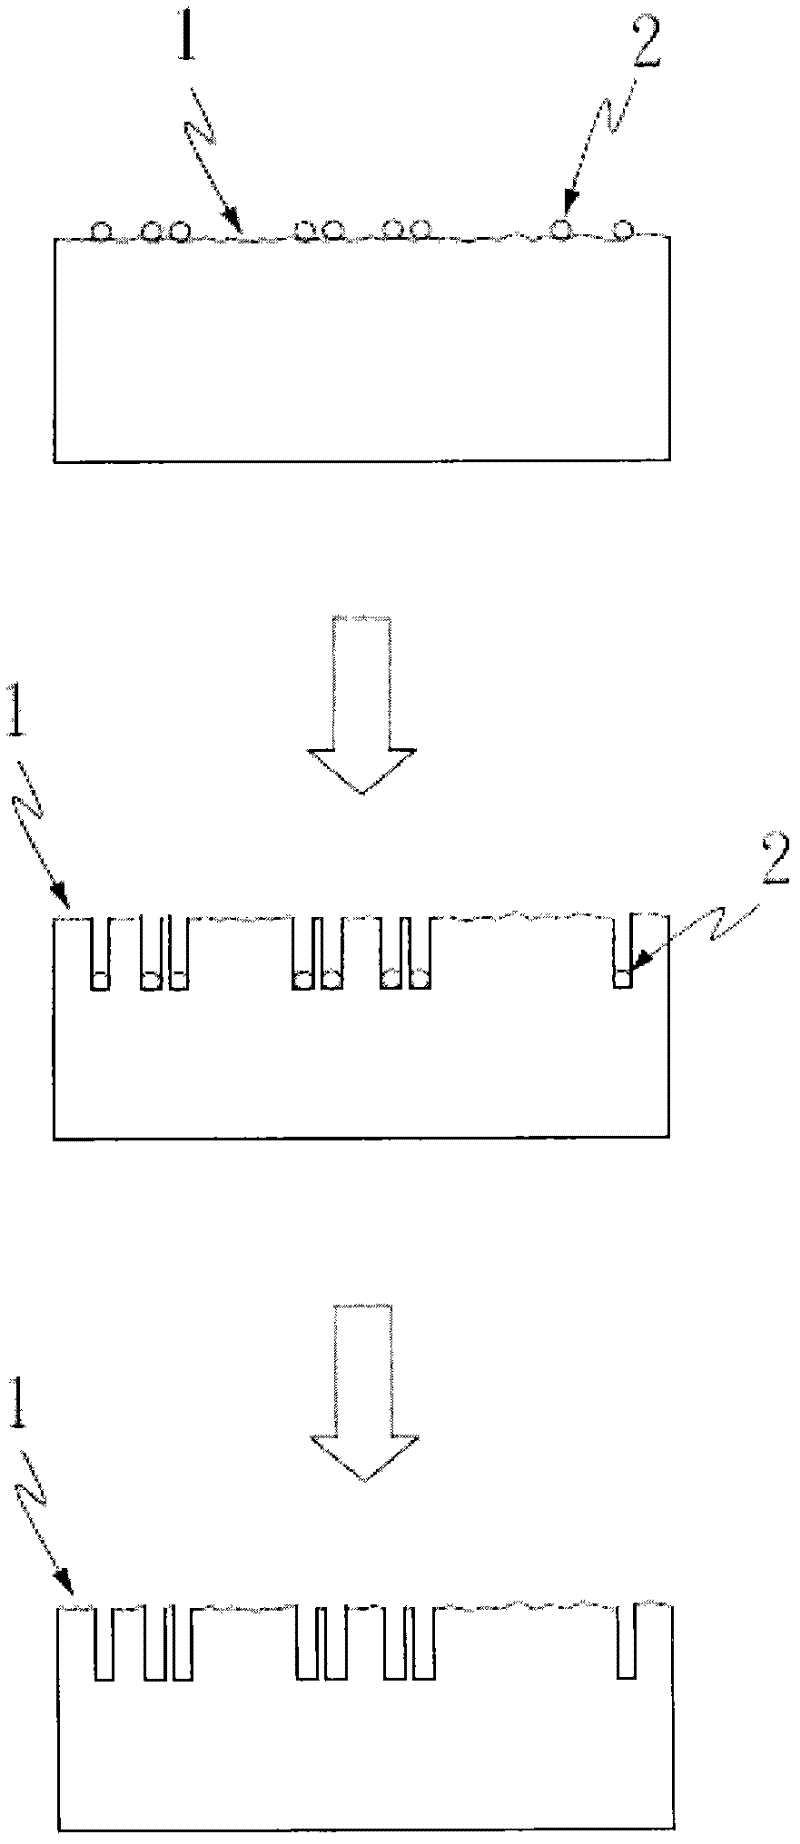 Method of forming micro-pore structures or trench structures on surface of silicon wafer substrate